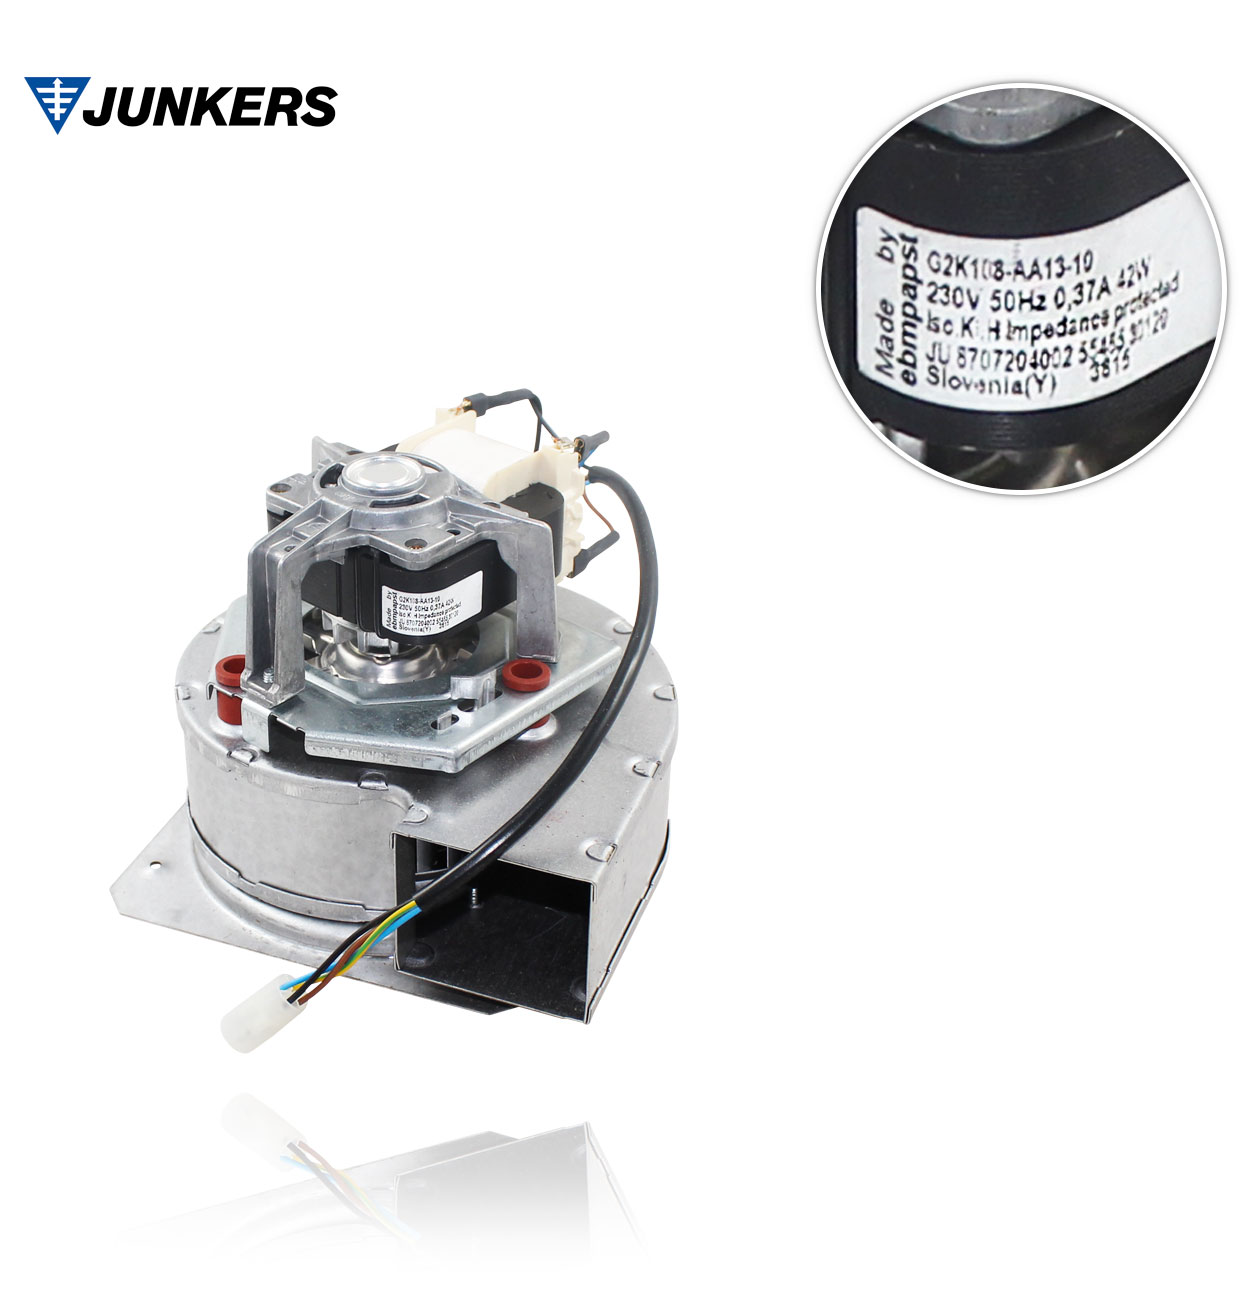 WR 325-5AM1E23S28/ ZW20 AME/ ZW23AE31 EXTRACTOR   JUNKERS 87072040010